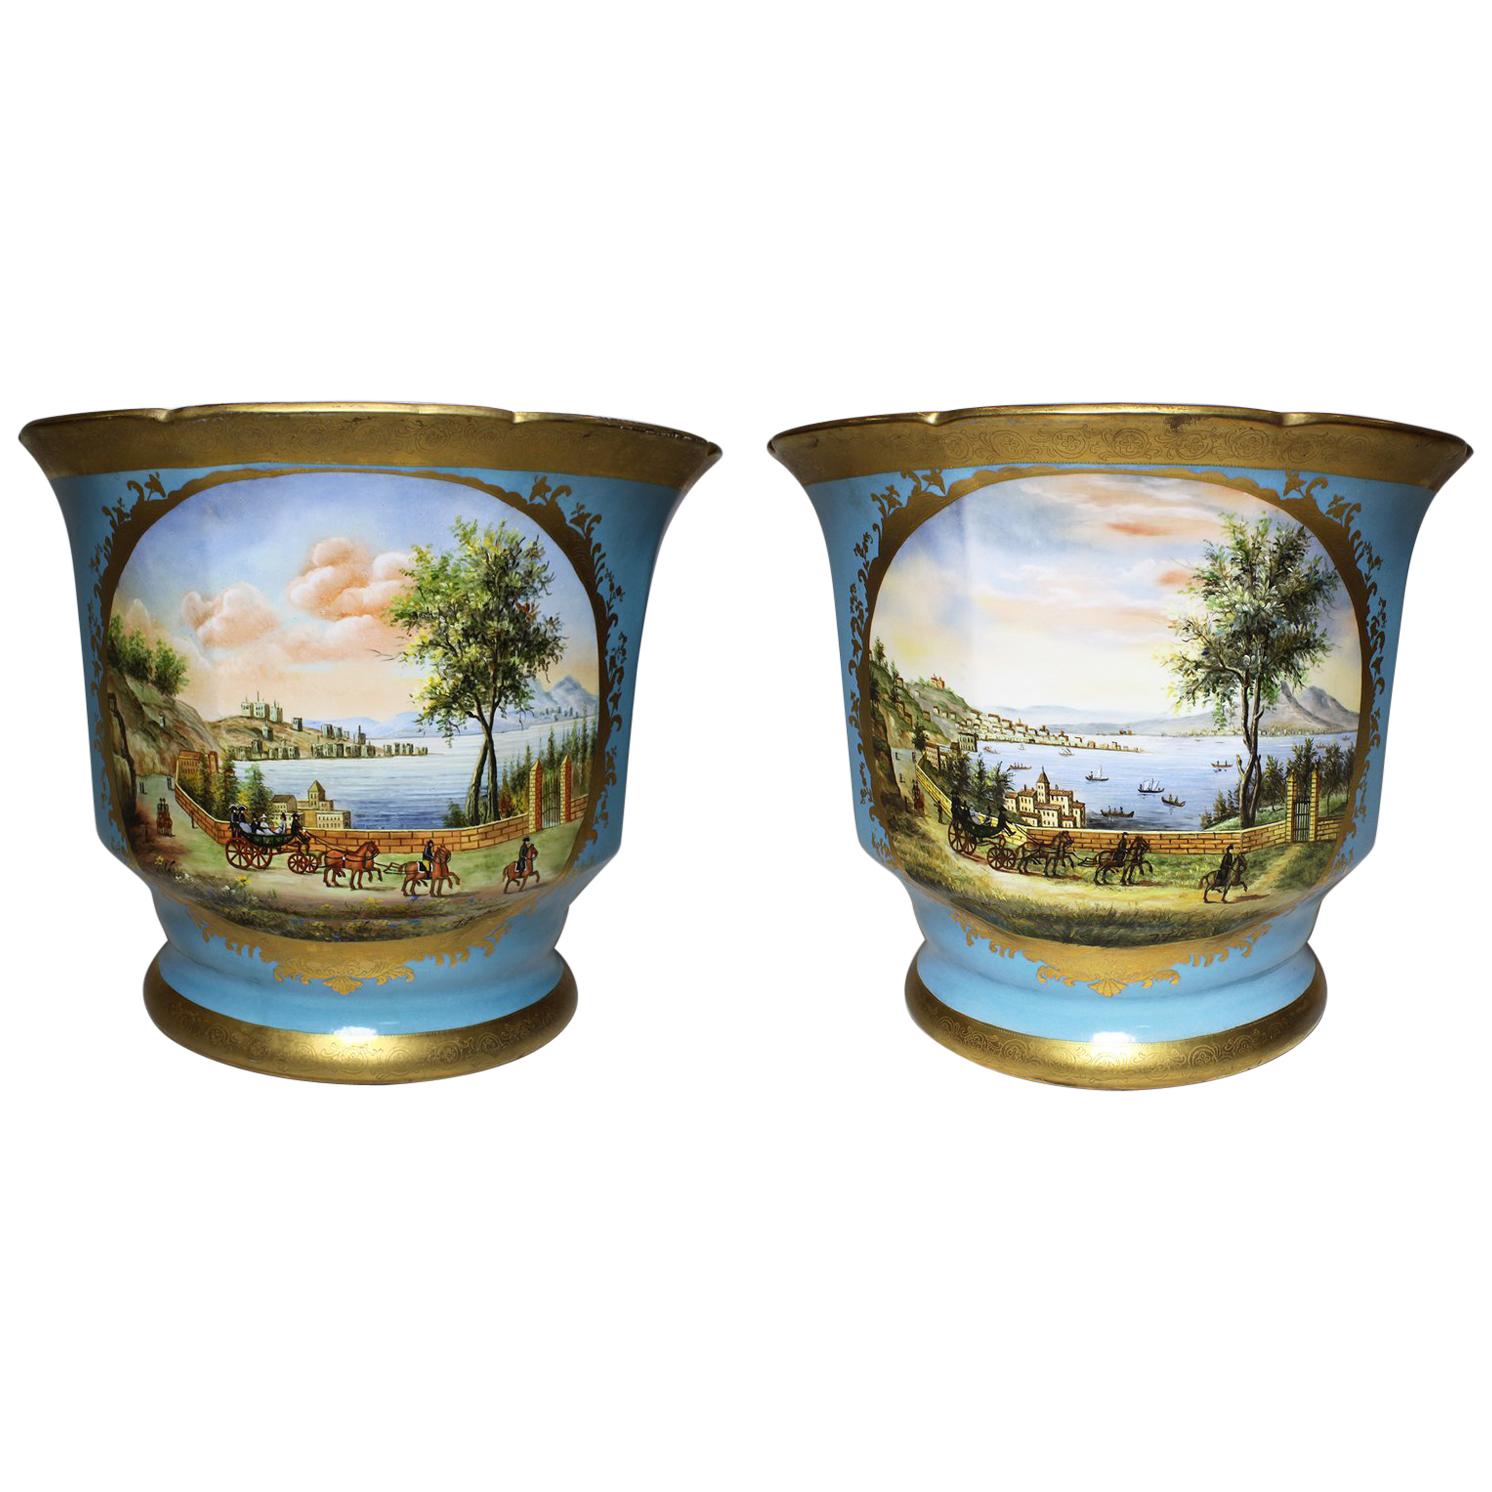 Continental 19th-20th Century Porcelain Cachepot Planter Vases Wine Coolers Pair For Sale